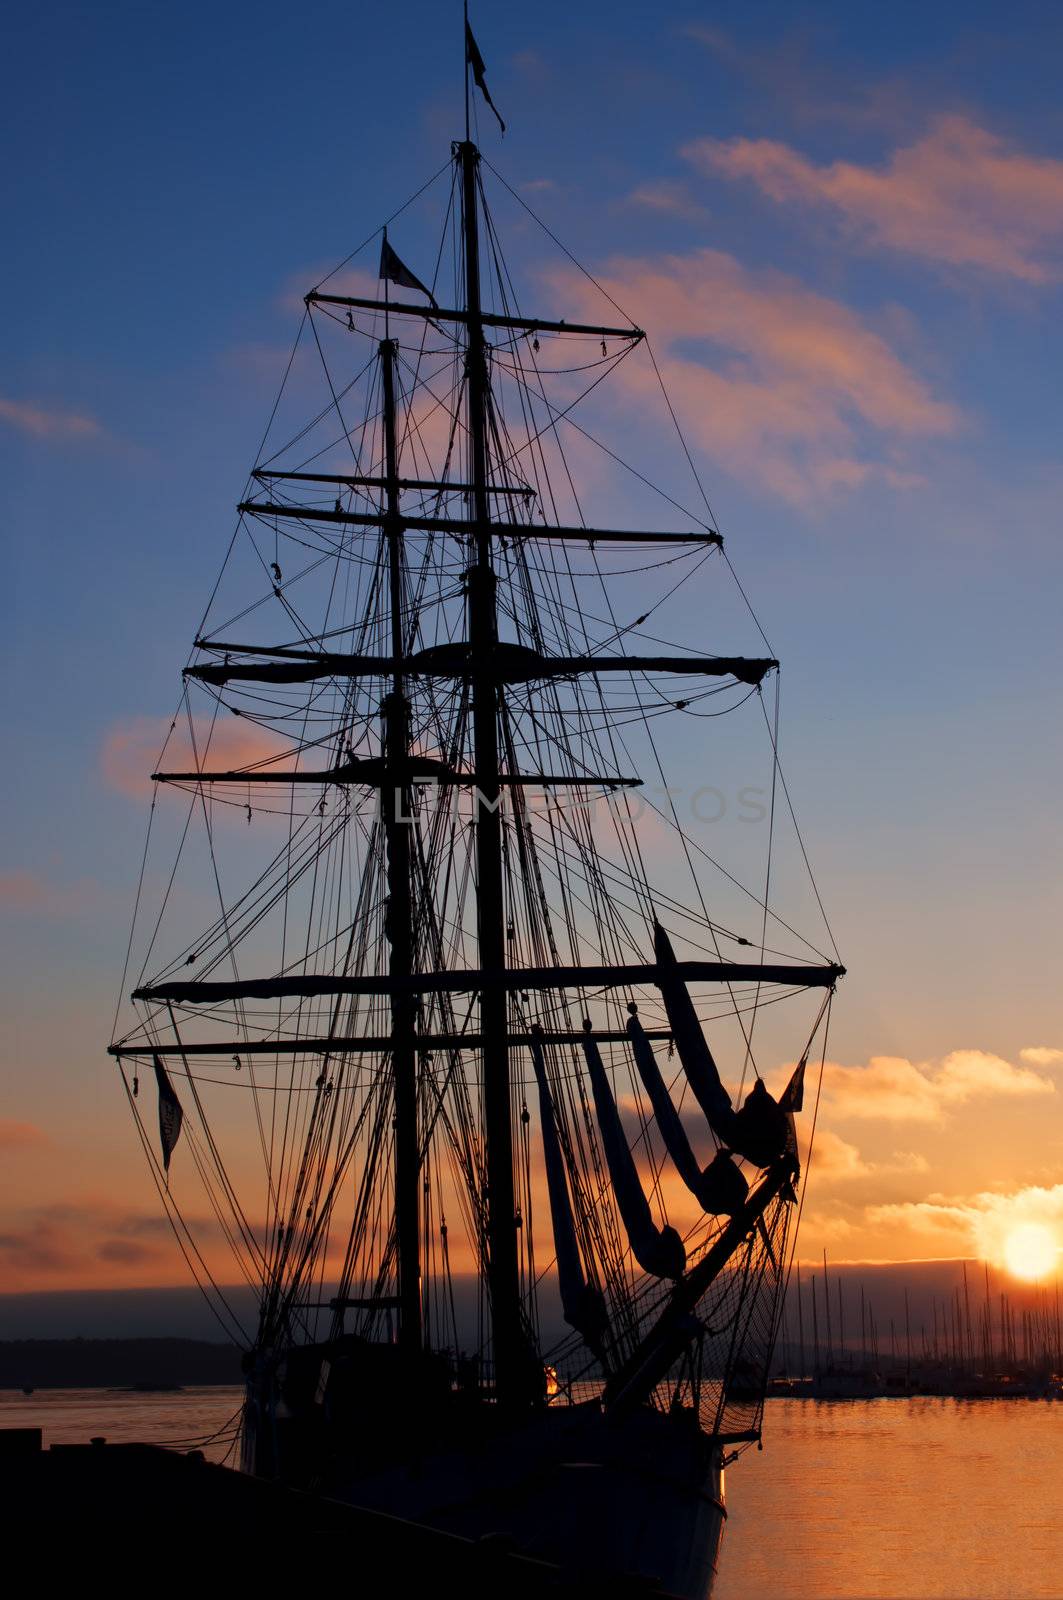 Tall ship silhouette at sunset at pier